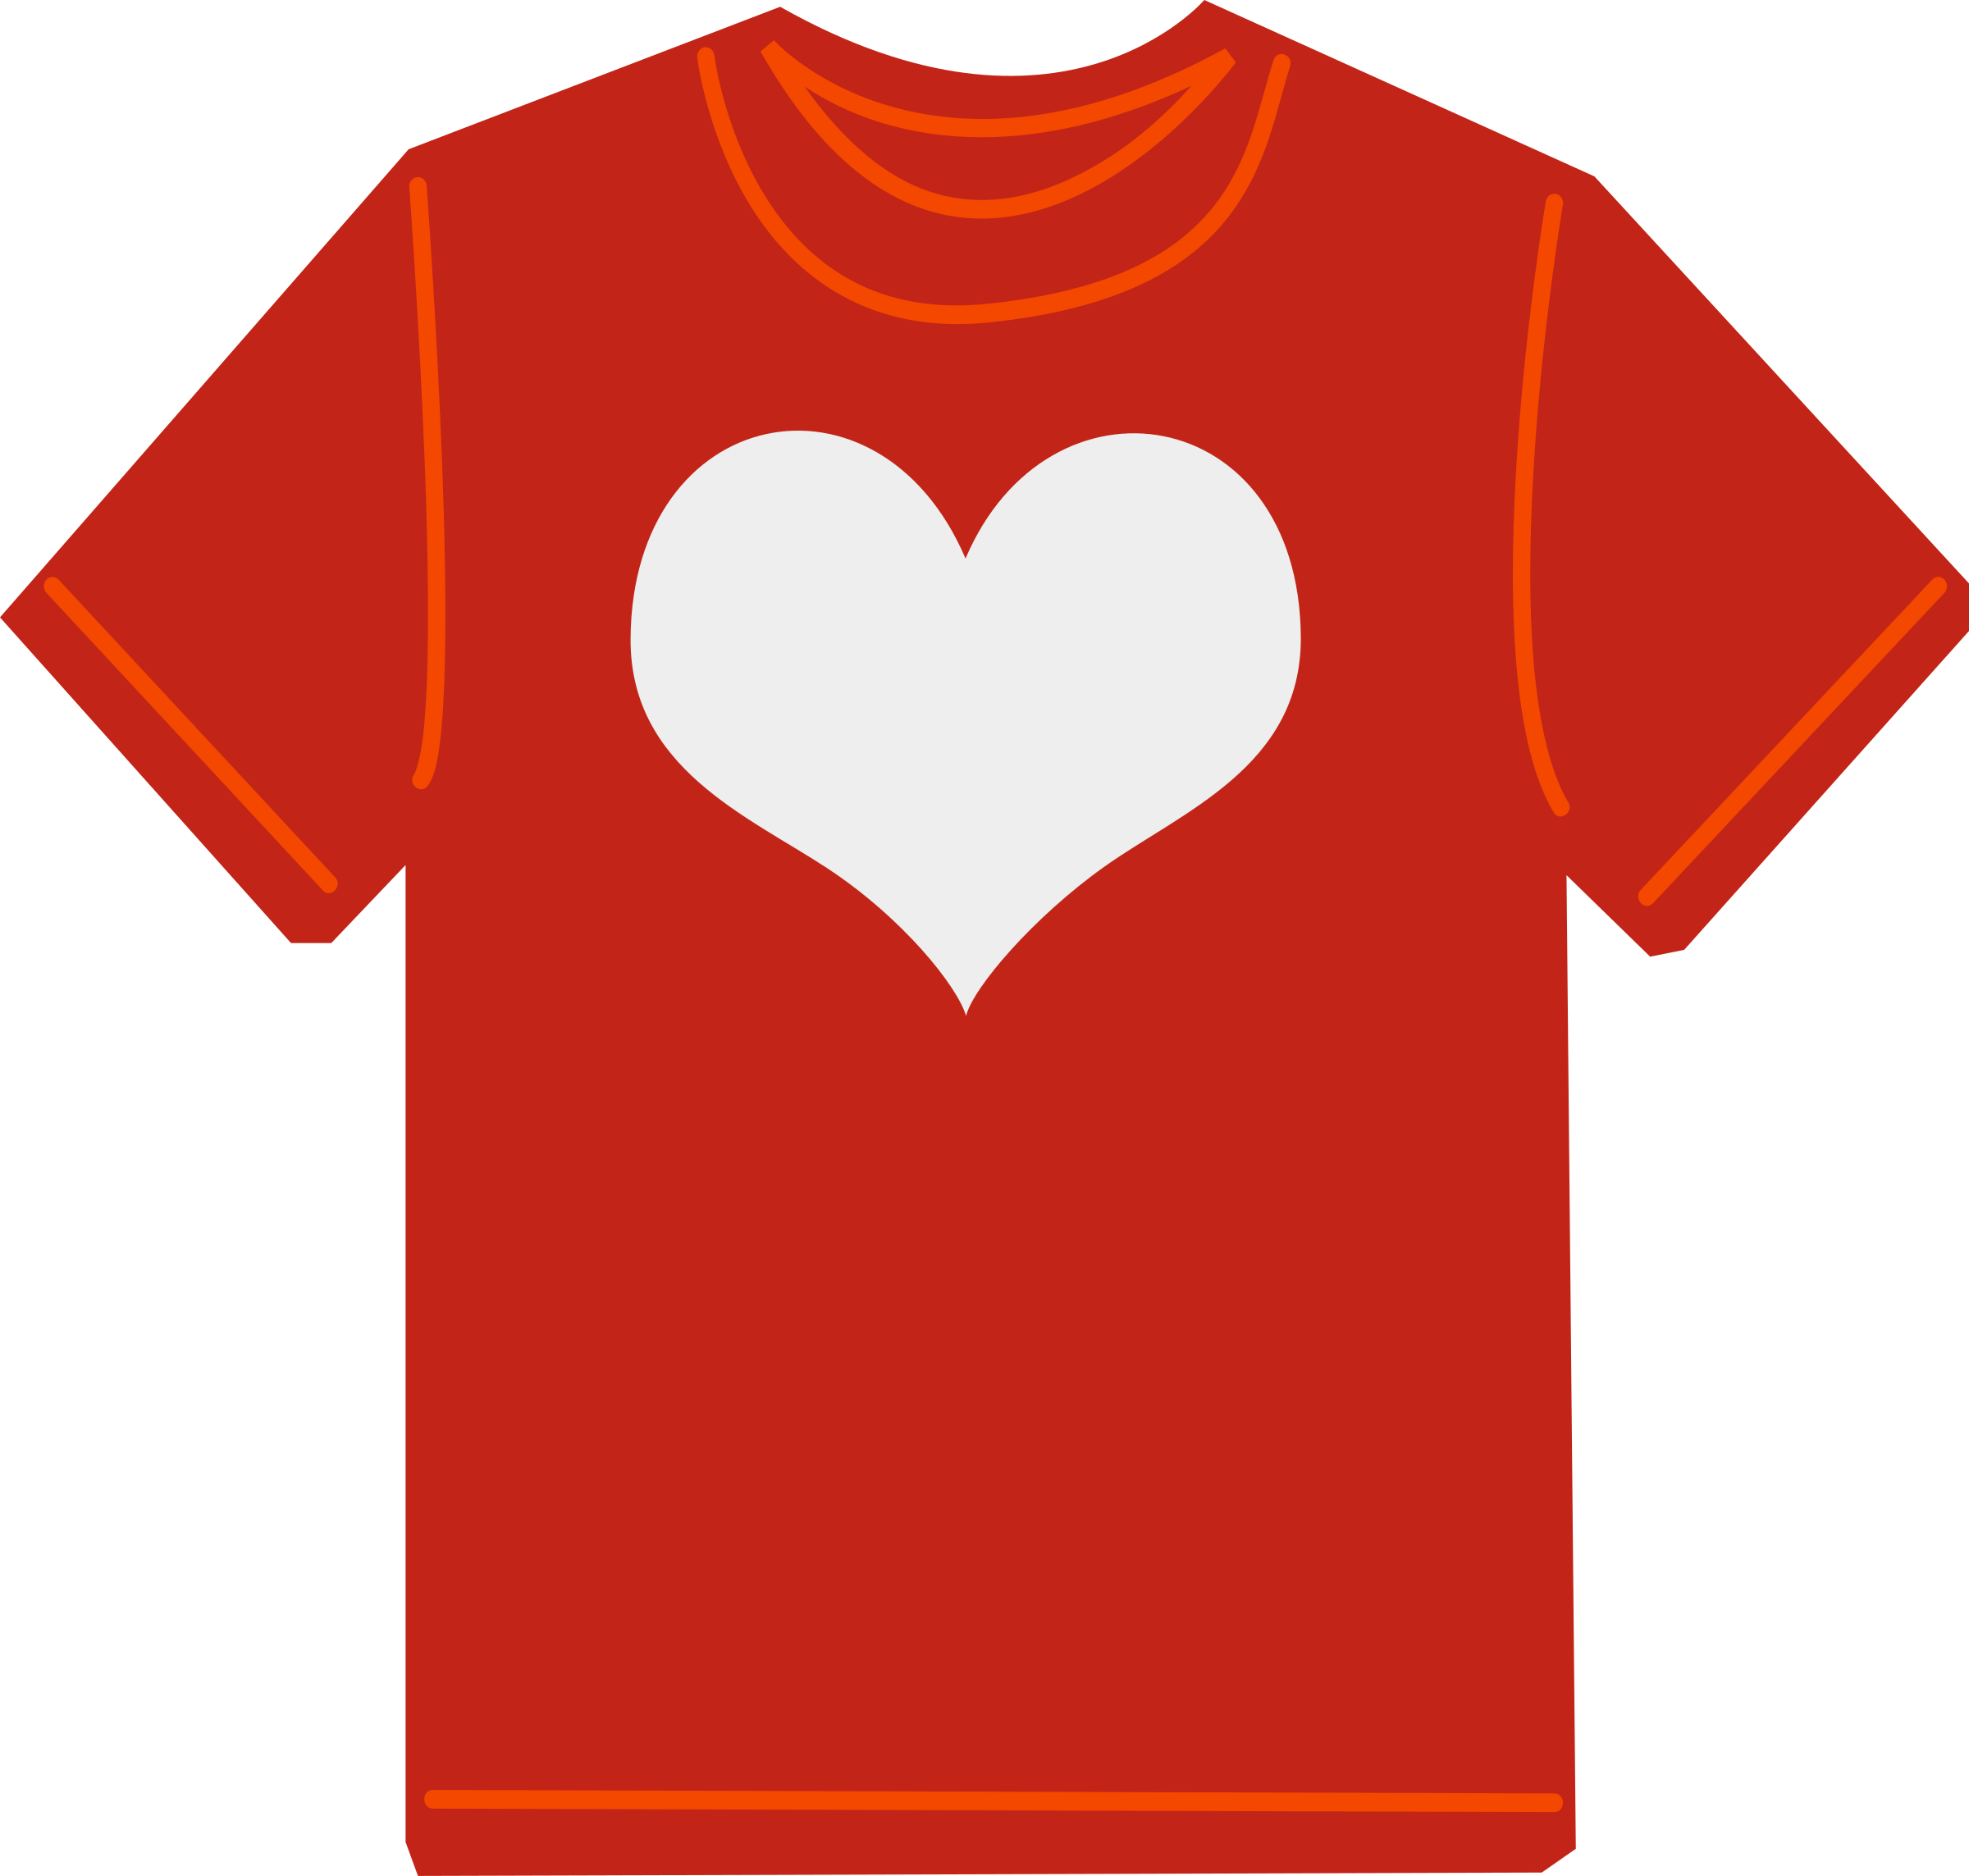 Red t big image. Shirt clipart top